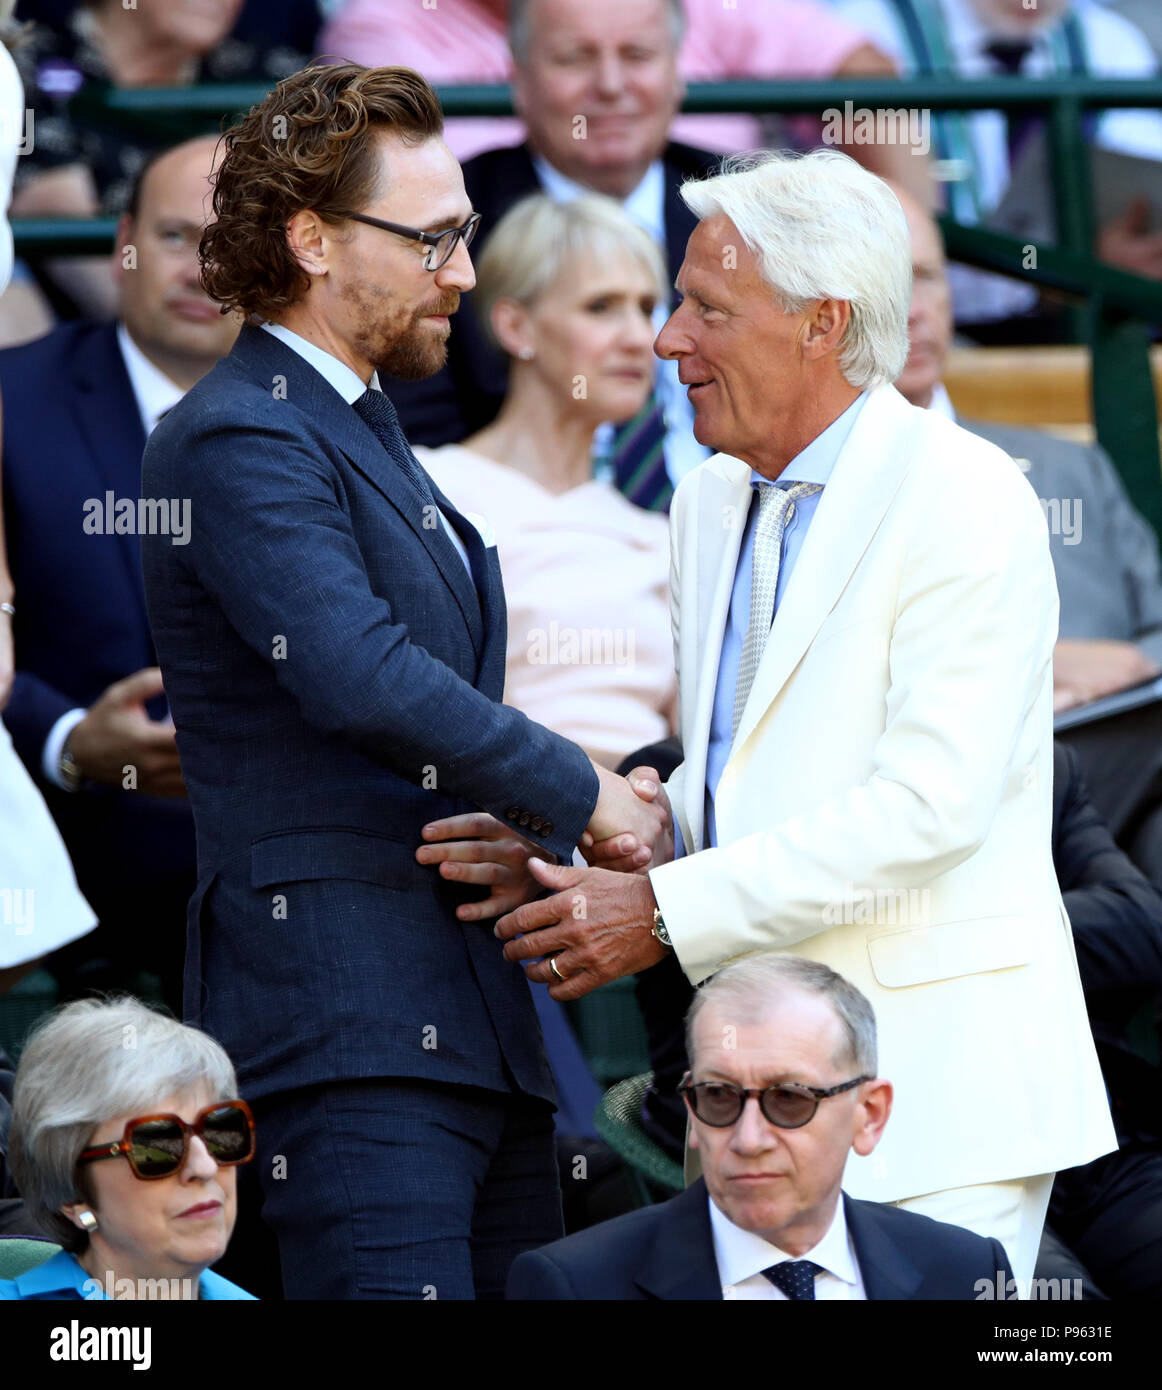 Tom Hiddleston (left) and Bjorn Borg in the royal box on centre court on day thirteen of the Wimbledon Championships at the All England Lawn Tennis and Croquet Club, Wimbledon. Stock Photo